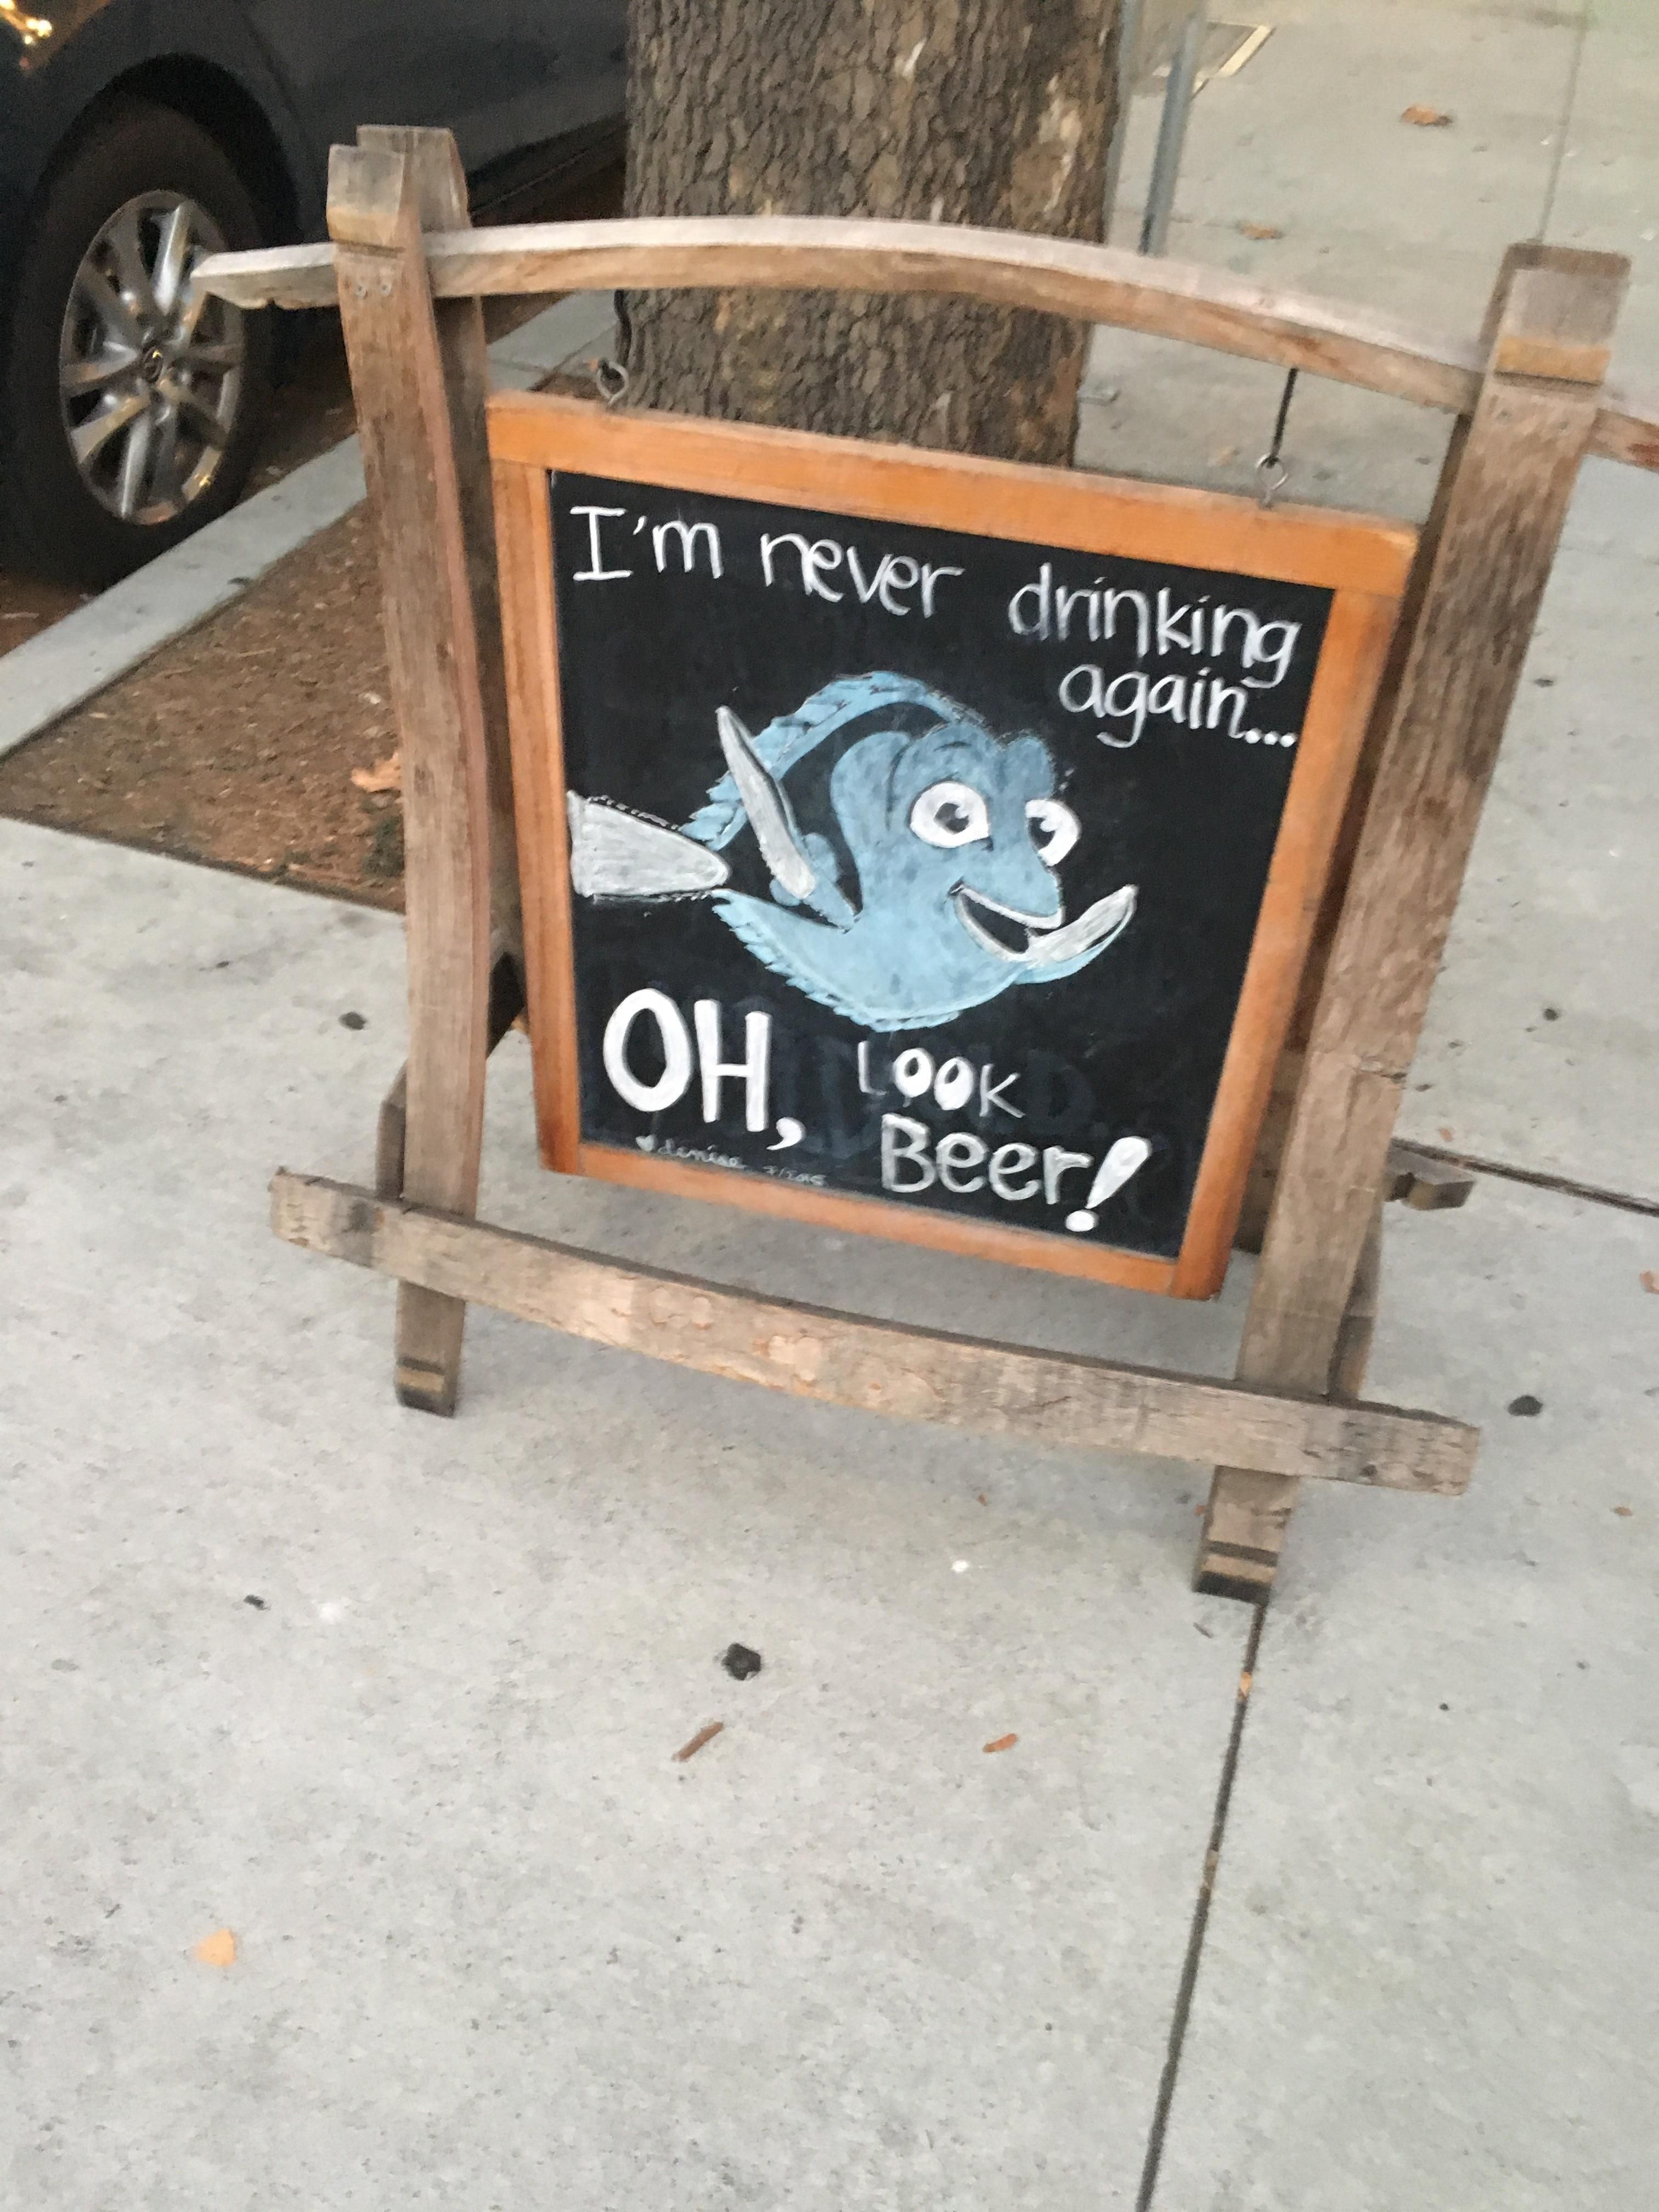 Saw this on front of a local bar